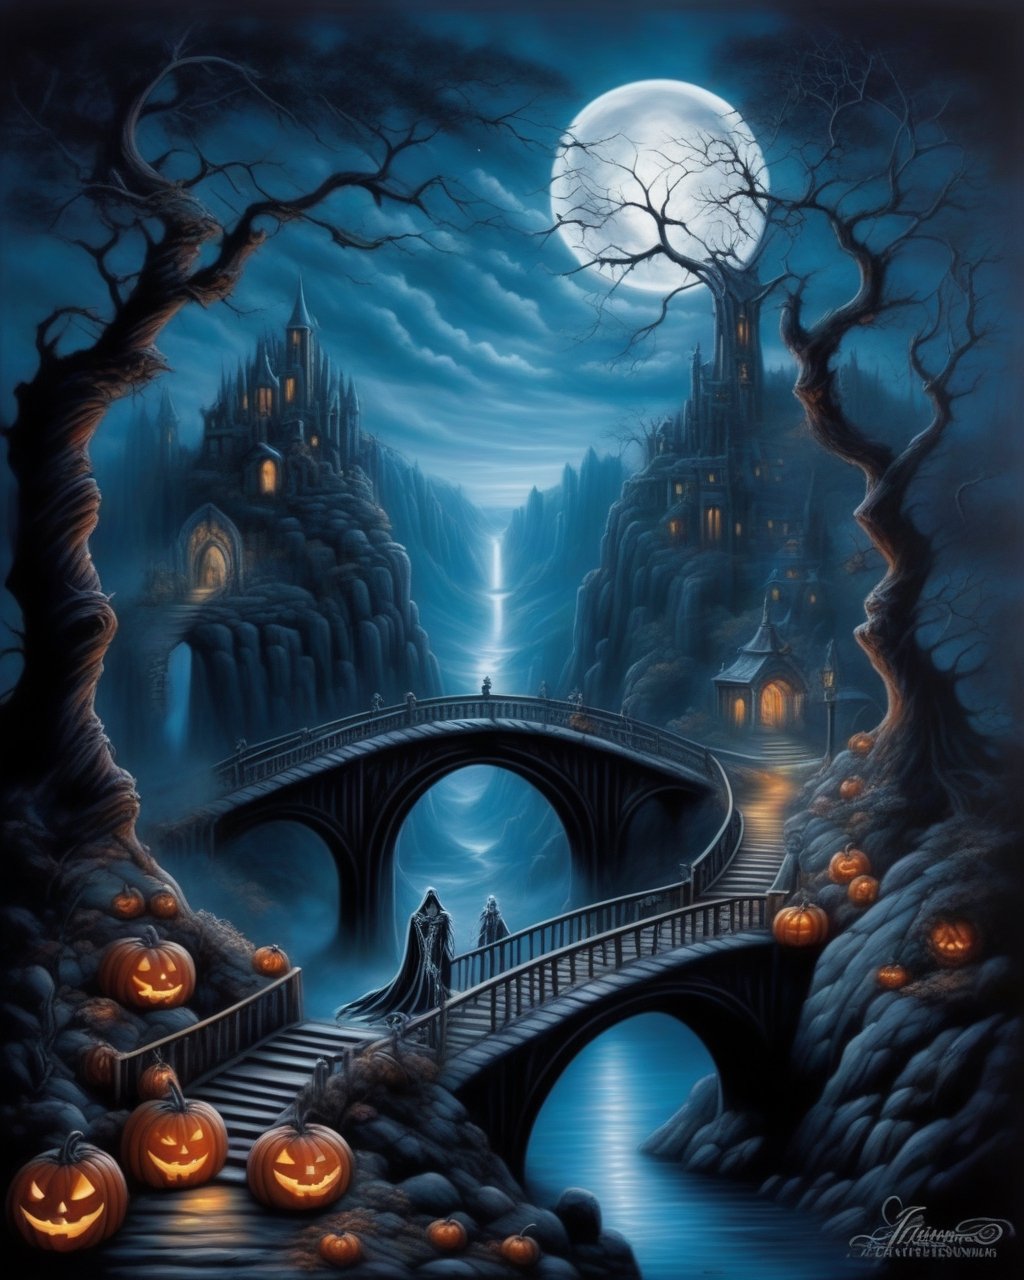 Anne Stokes style,halloween landscape, (cityscape), skeletons, canyon, bridge, stary autumn sky, moonlight, spooky, characters, dark, eerie, fantasy, gothic, mysterious, whimsical